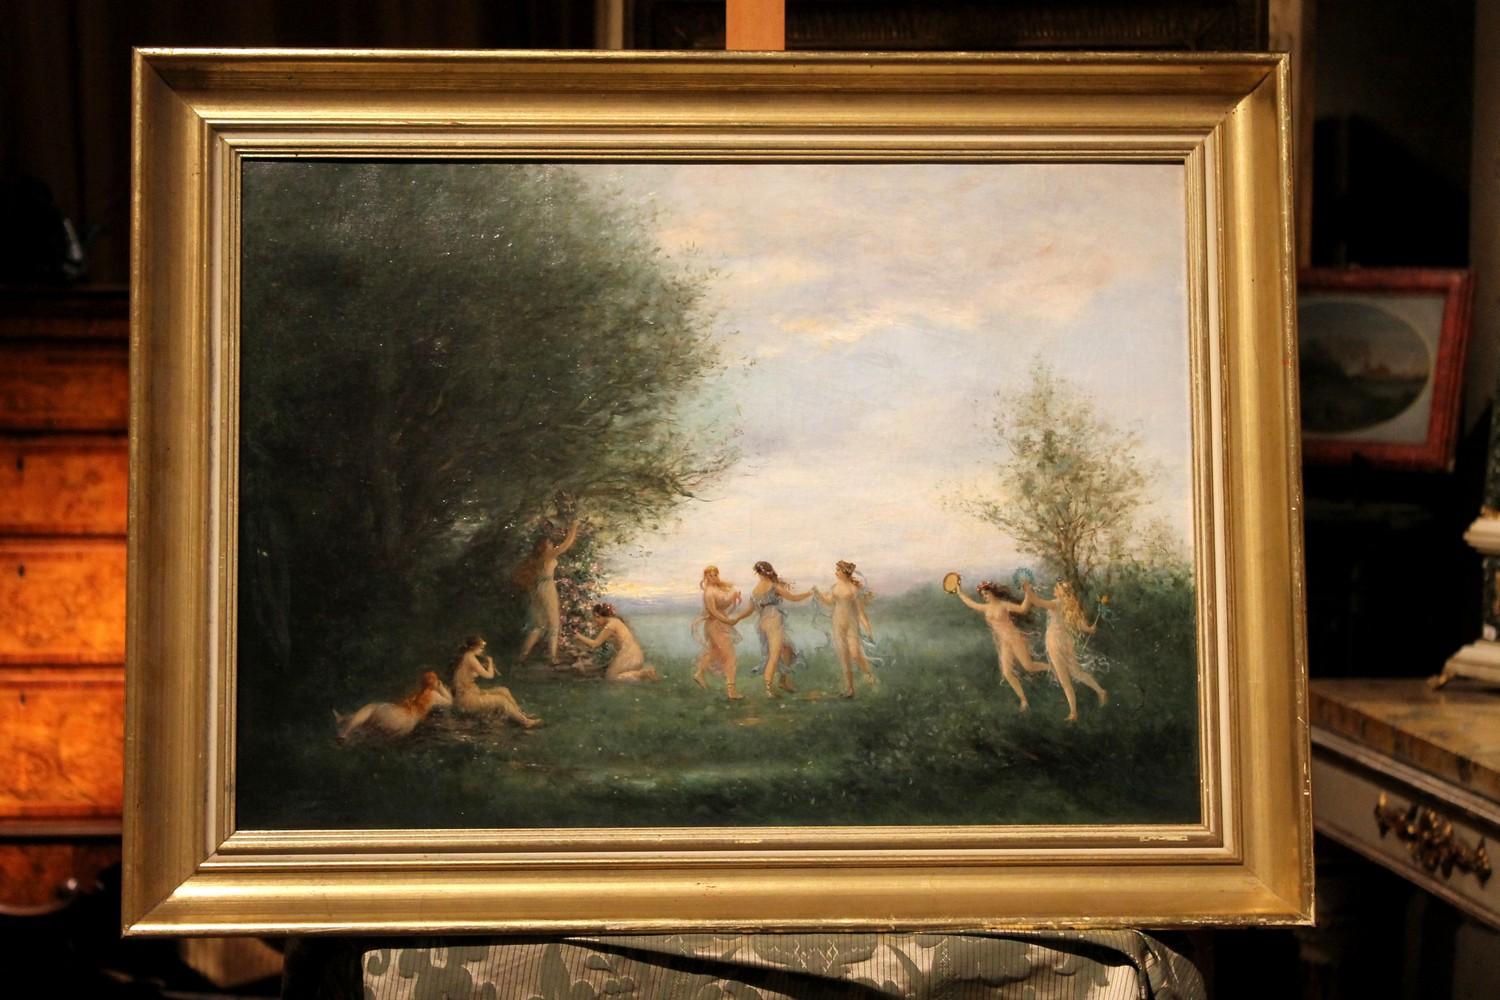 A luxuriant forest is the romantic and lyrical landscape where the dance of the nude nymphs takes place in this joyful 19th Century antique oil on canvas painting featuring a mythological scene.
Dance of the Nymphs and Naiads is a myth inspired by